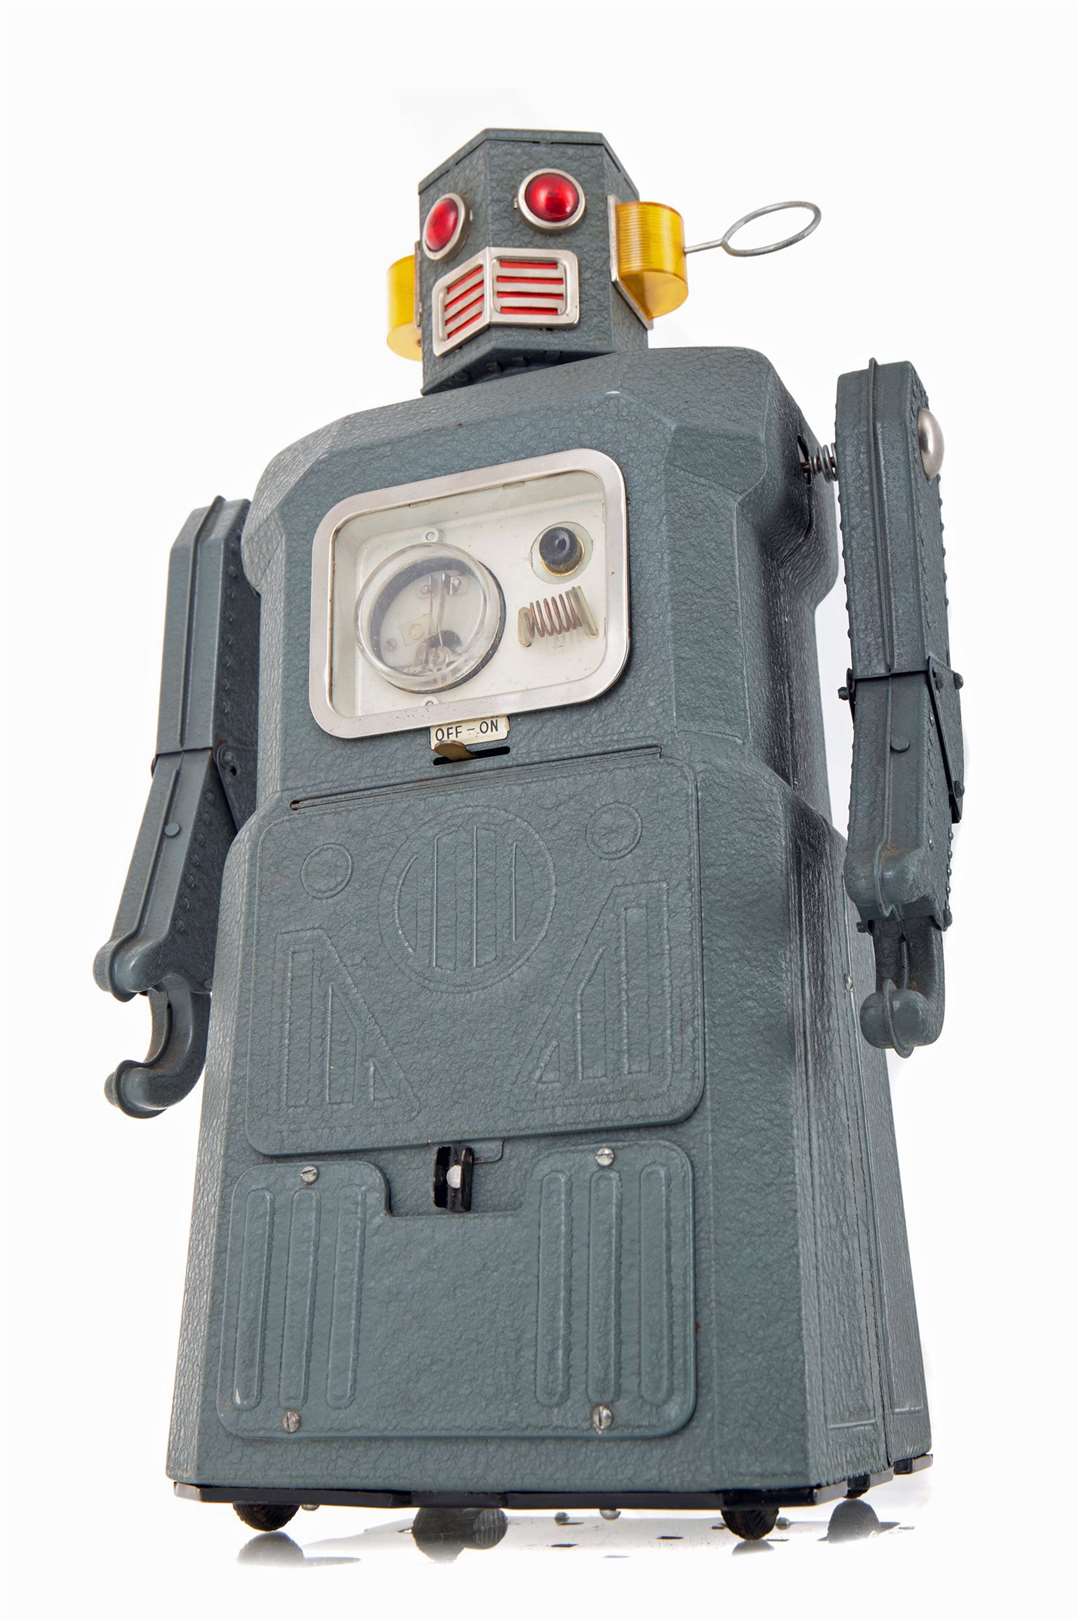 The rare 1957 Radicon toy robot sold at auction on Friday (McTear’s Auctioneers/PA)